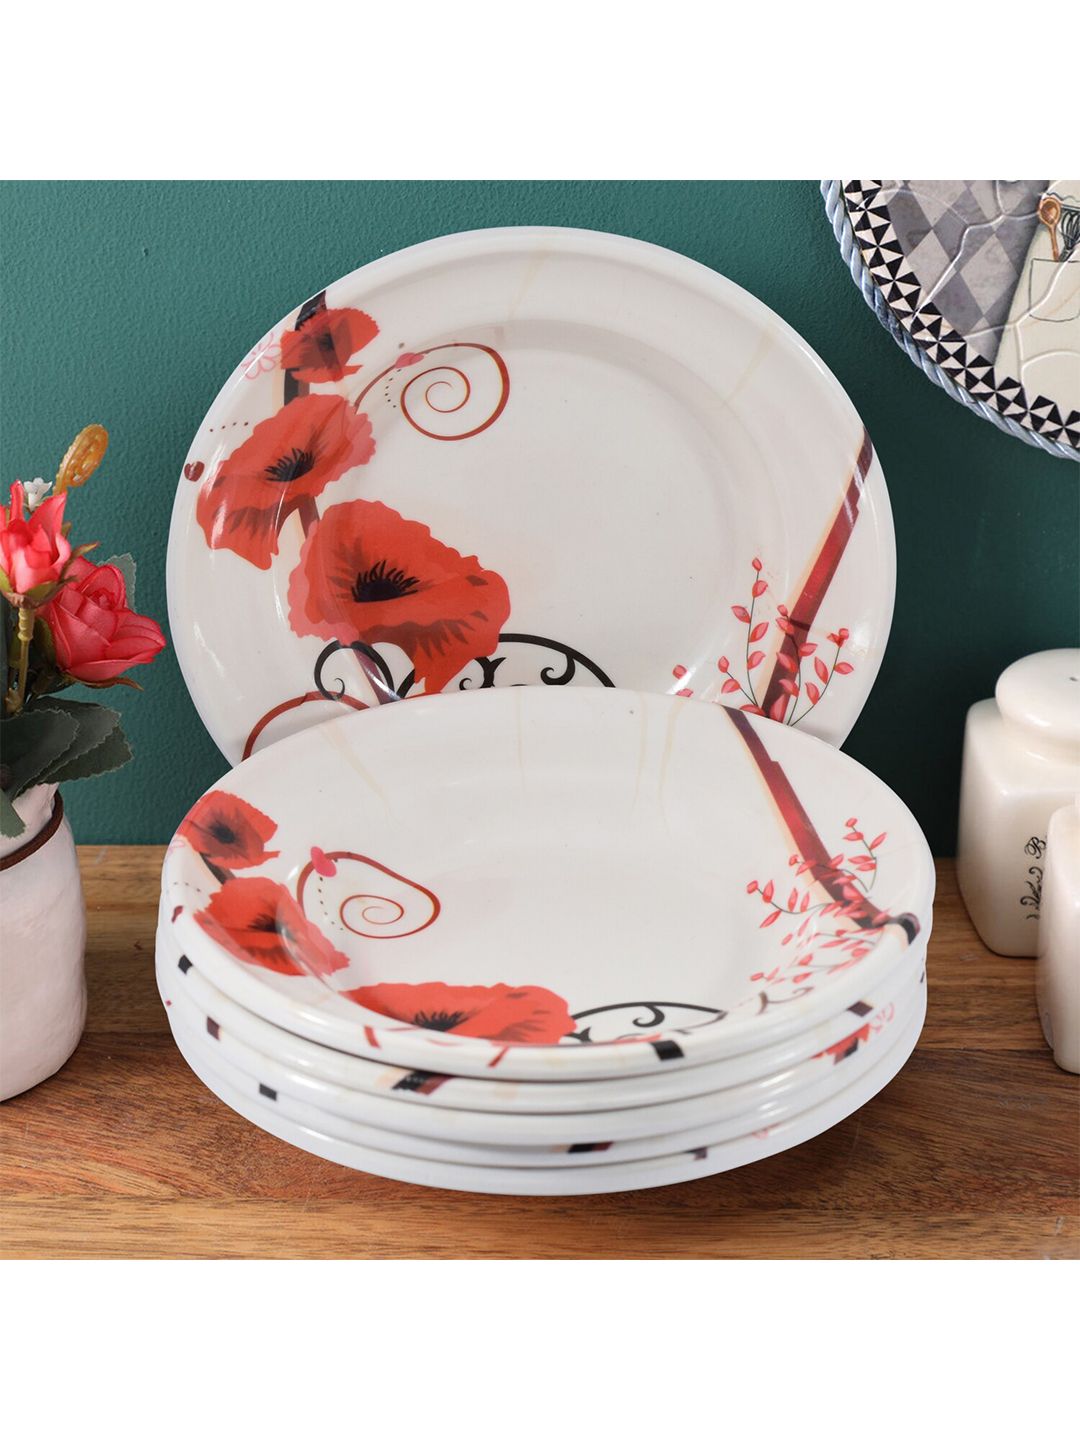 Gallery99 White & Red 6 Pieces Floral Printed Melamine Glossy Plates Set Price in India